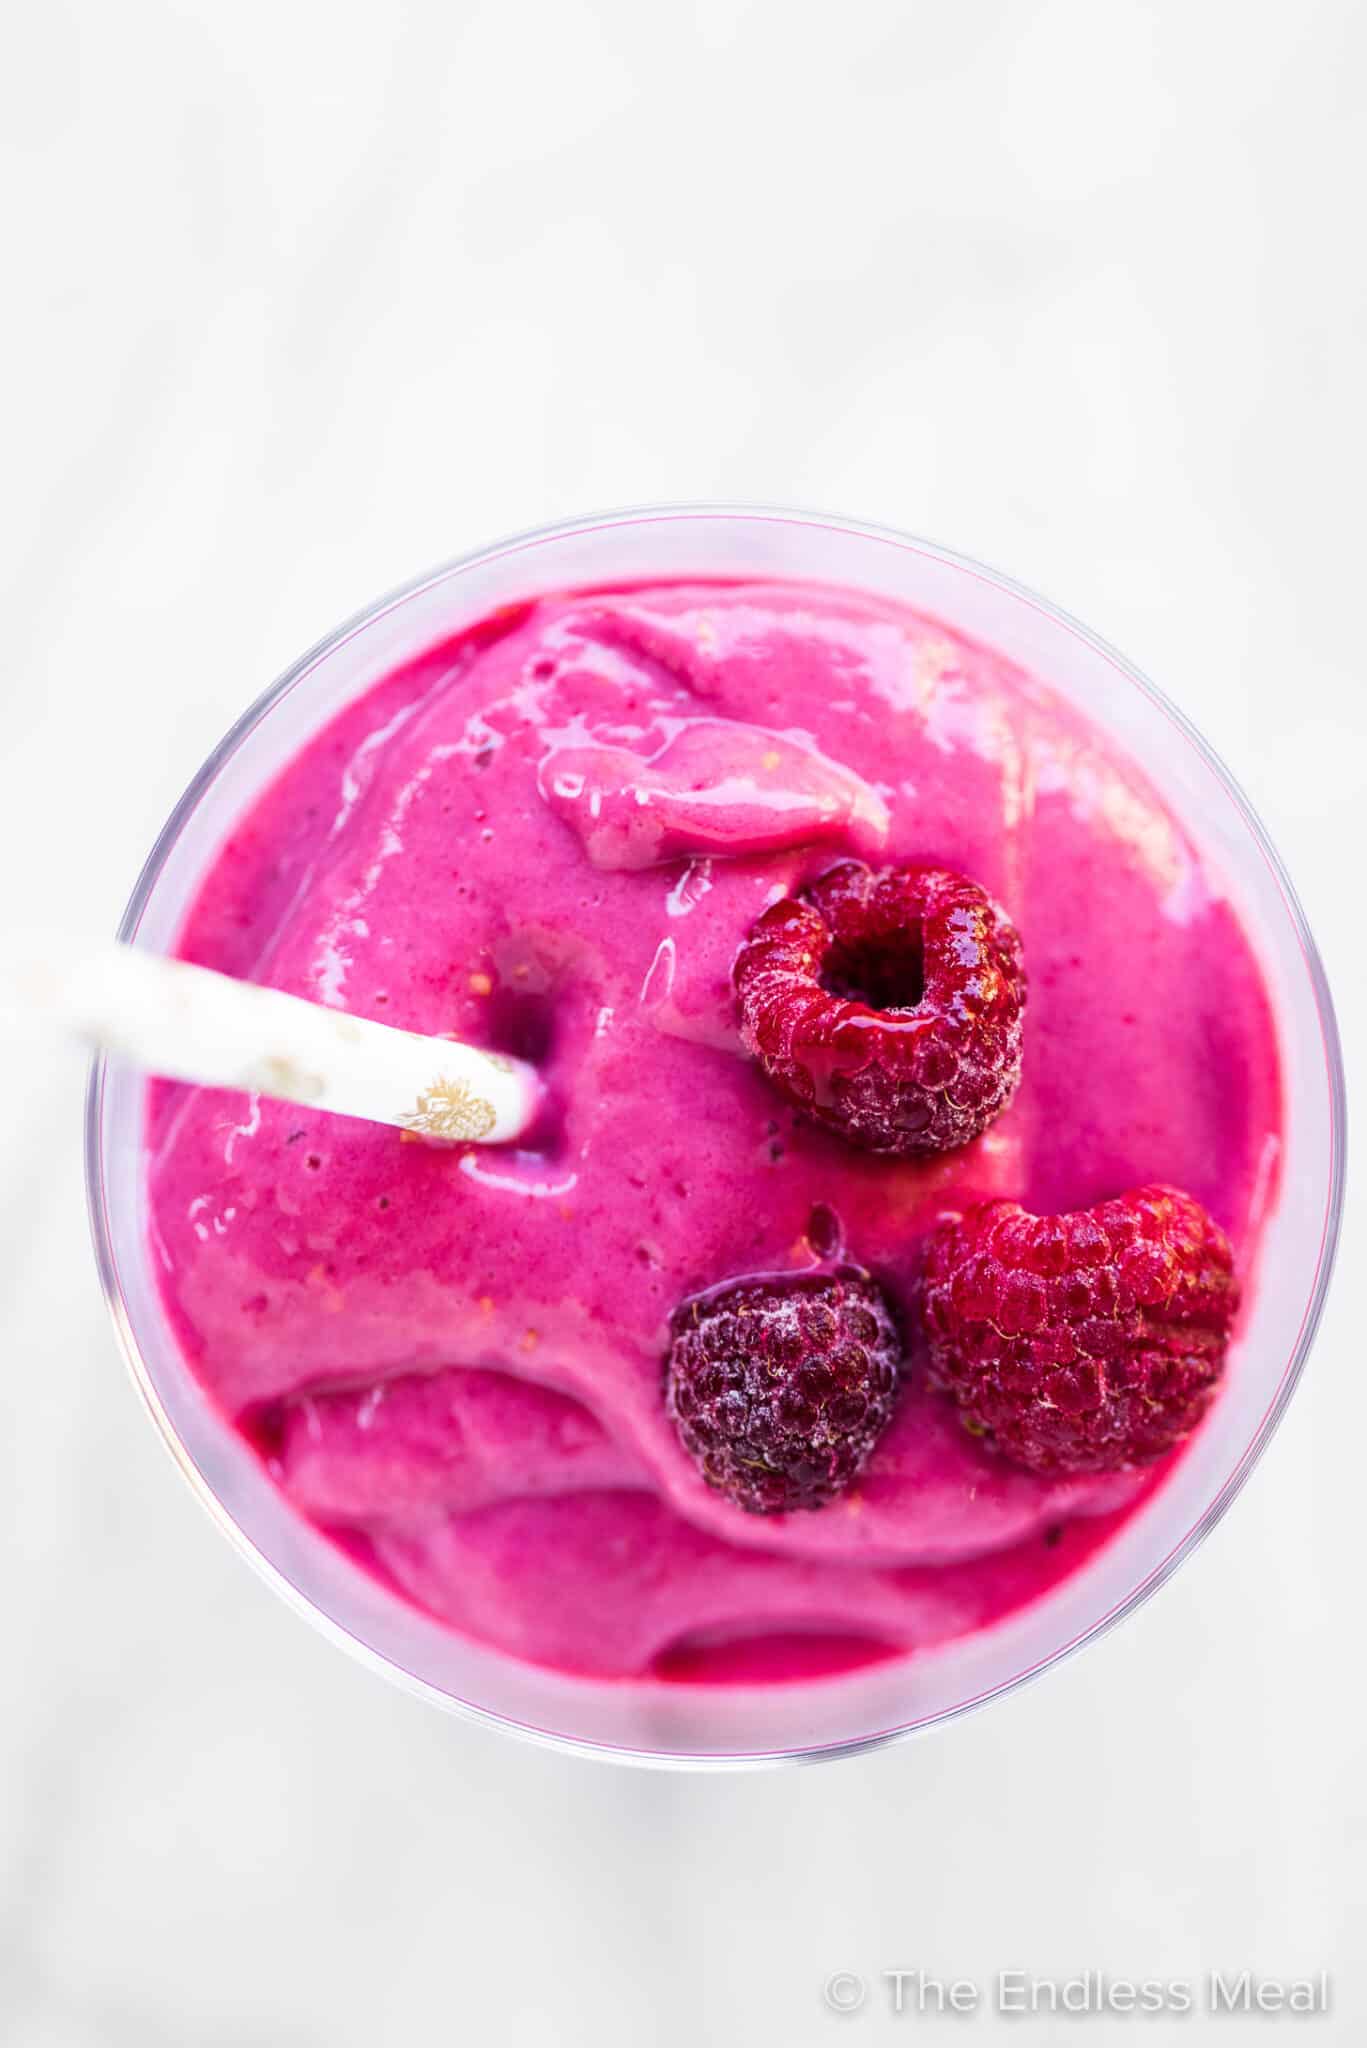 A bright pink tofu smoothie with berries on top.